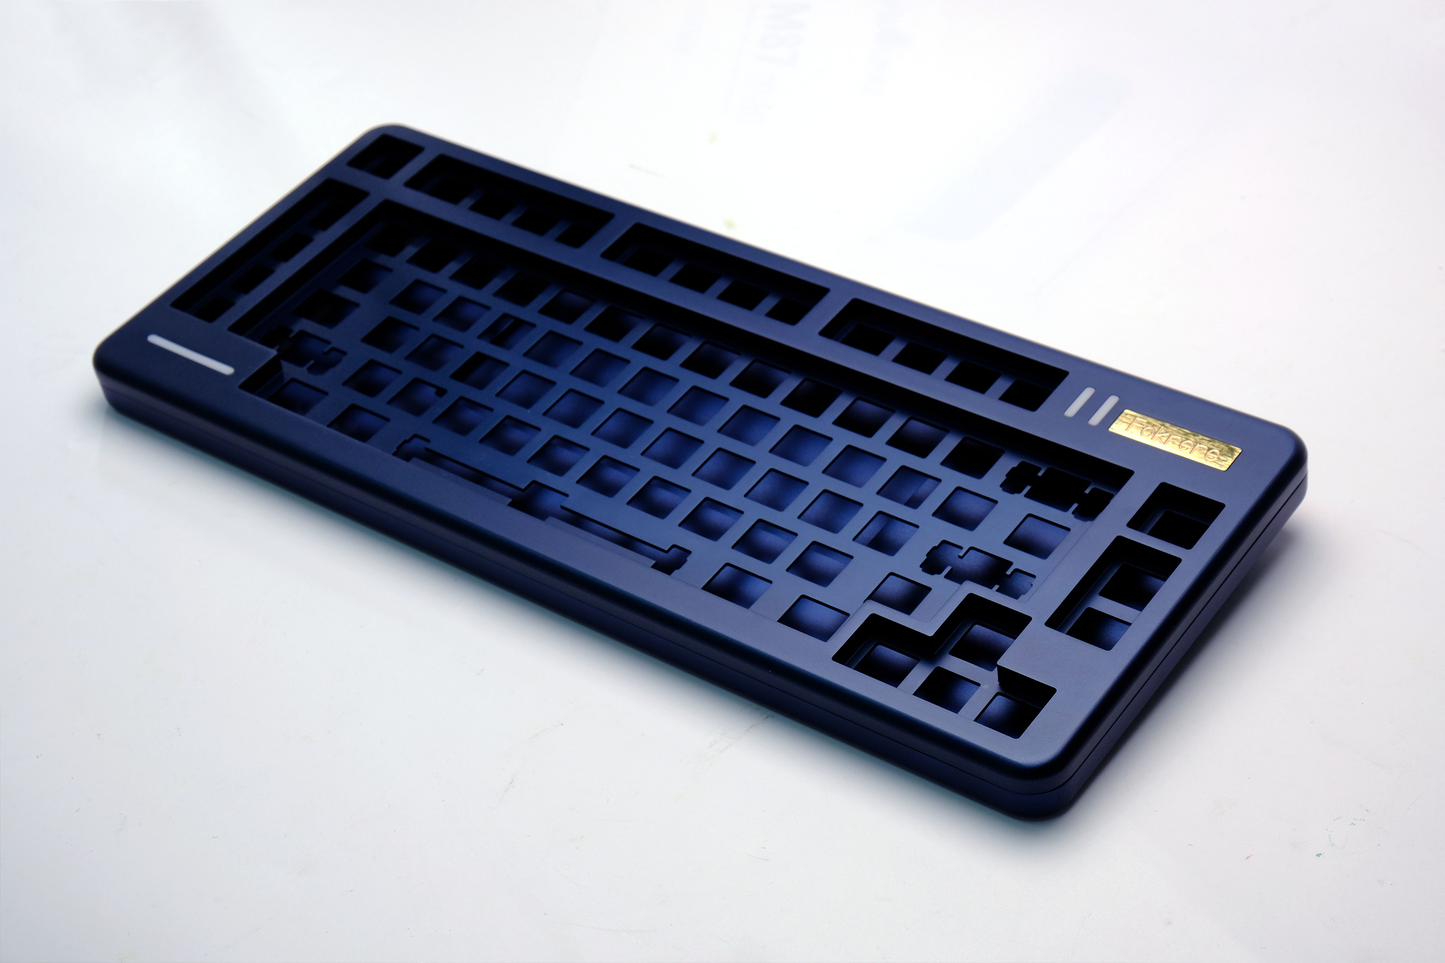 FOKRERE82 TYPE-C WIRED MECHANICAL KEYBOARD KIT